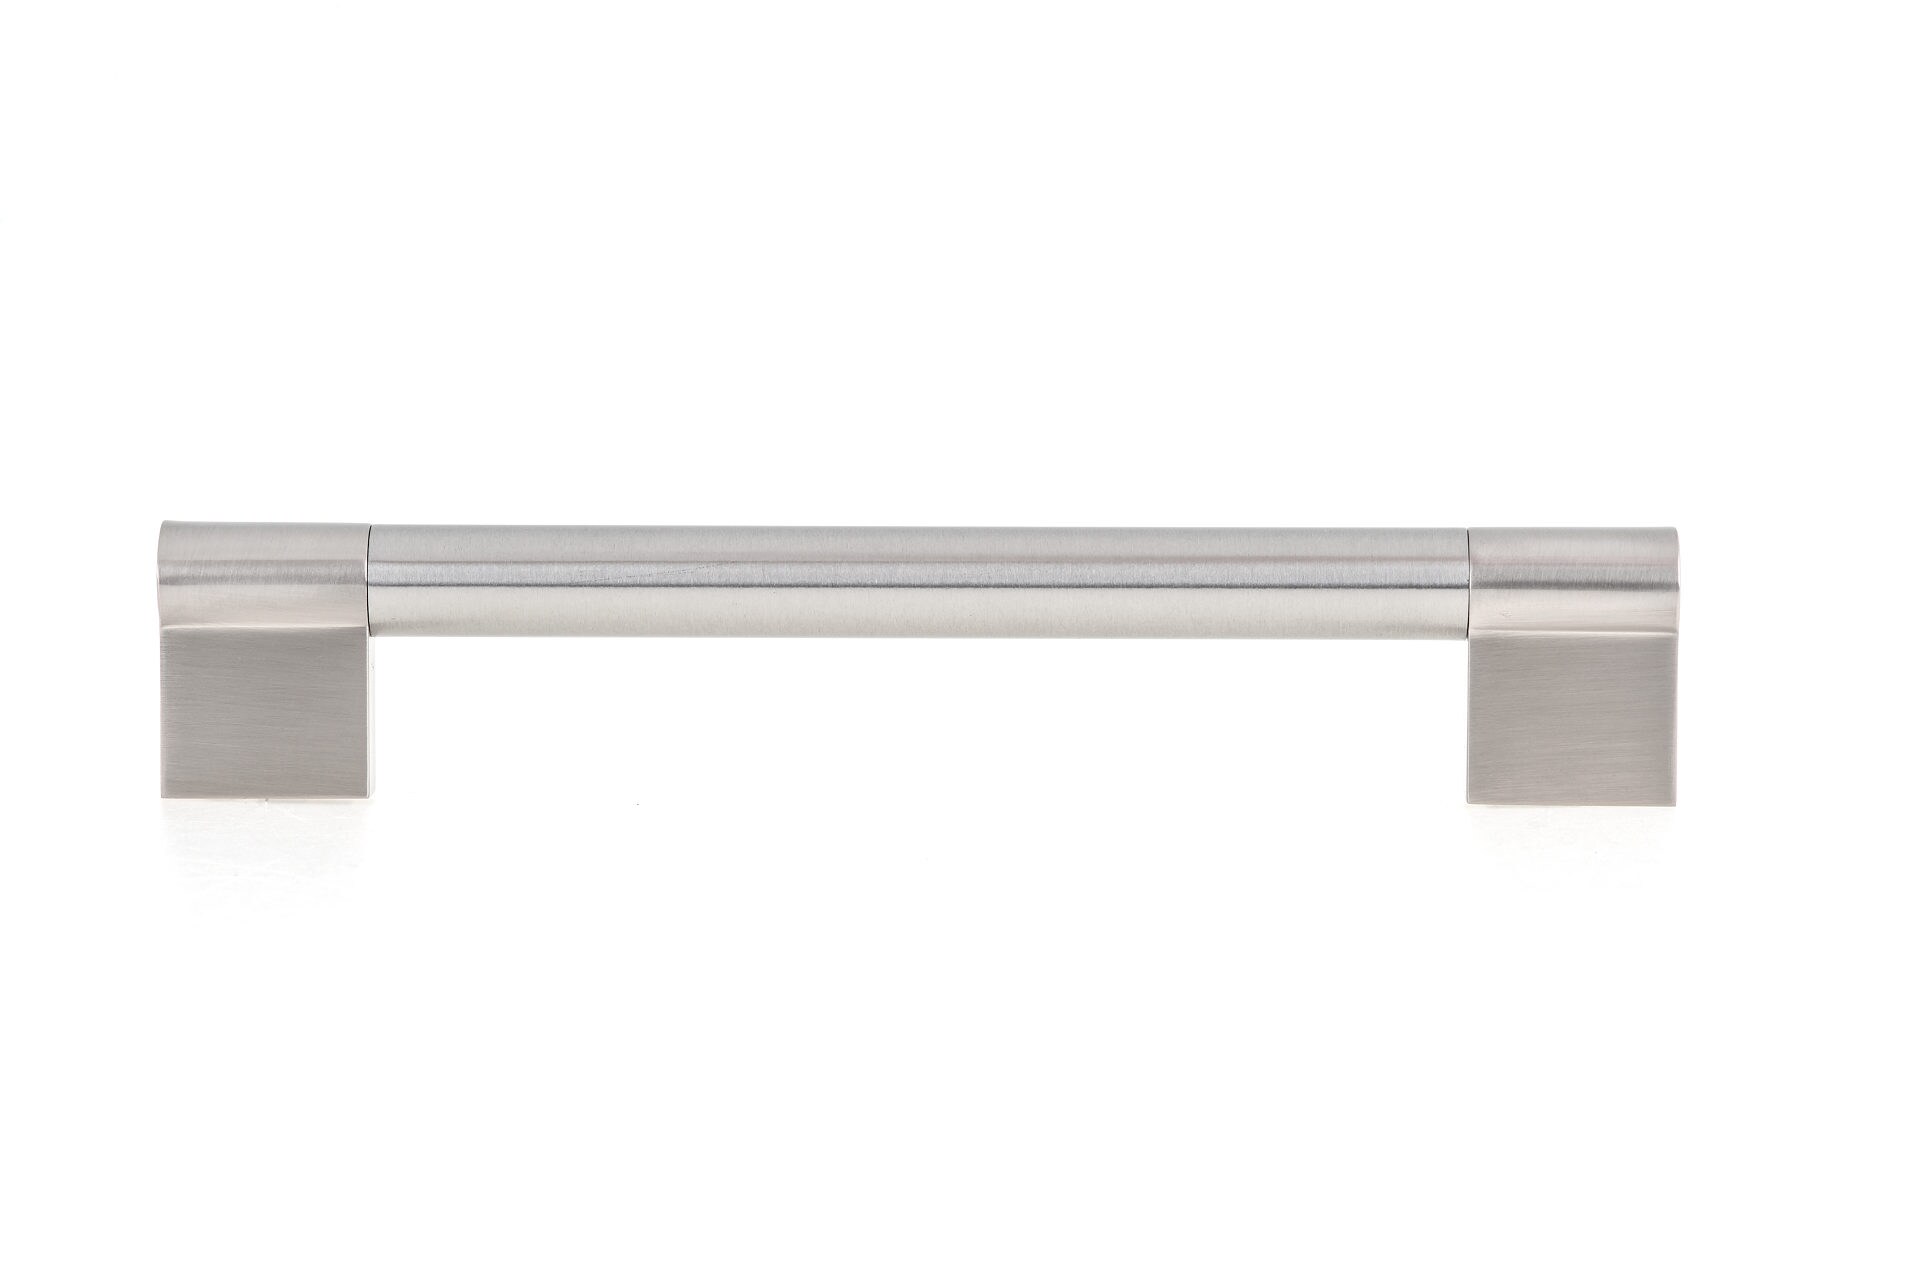 160 mm Richelieu Hardware BP795160195 6-1/4 in - Brushed Nickel Finish Metal Handle Pull